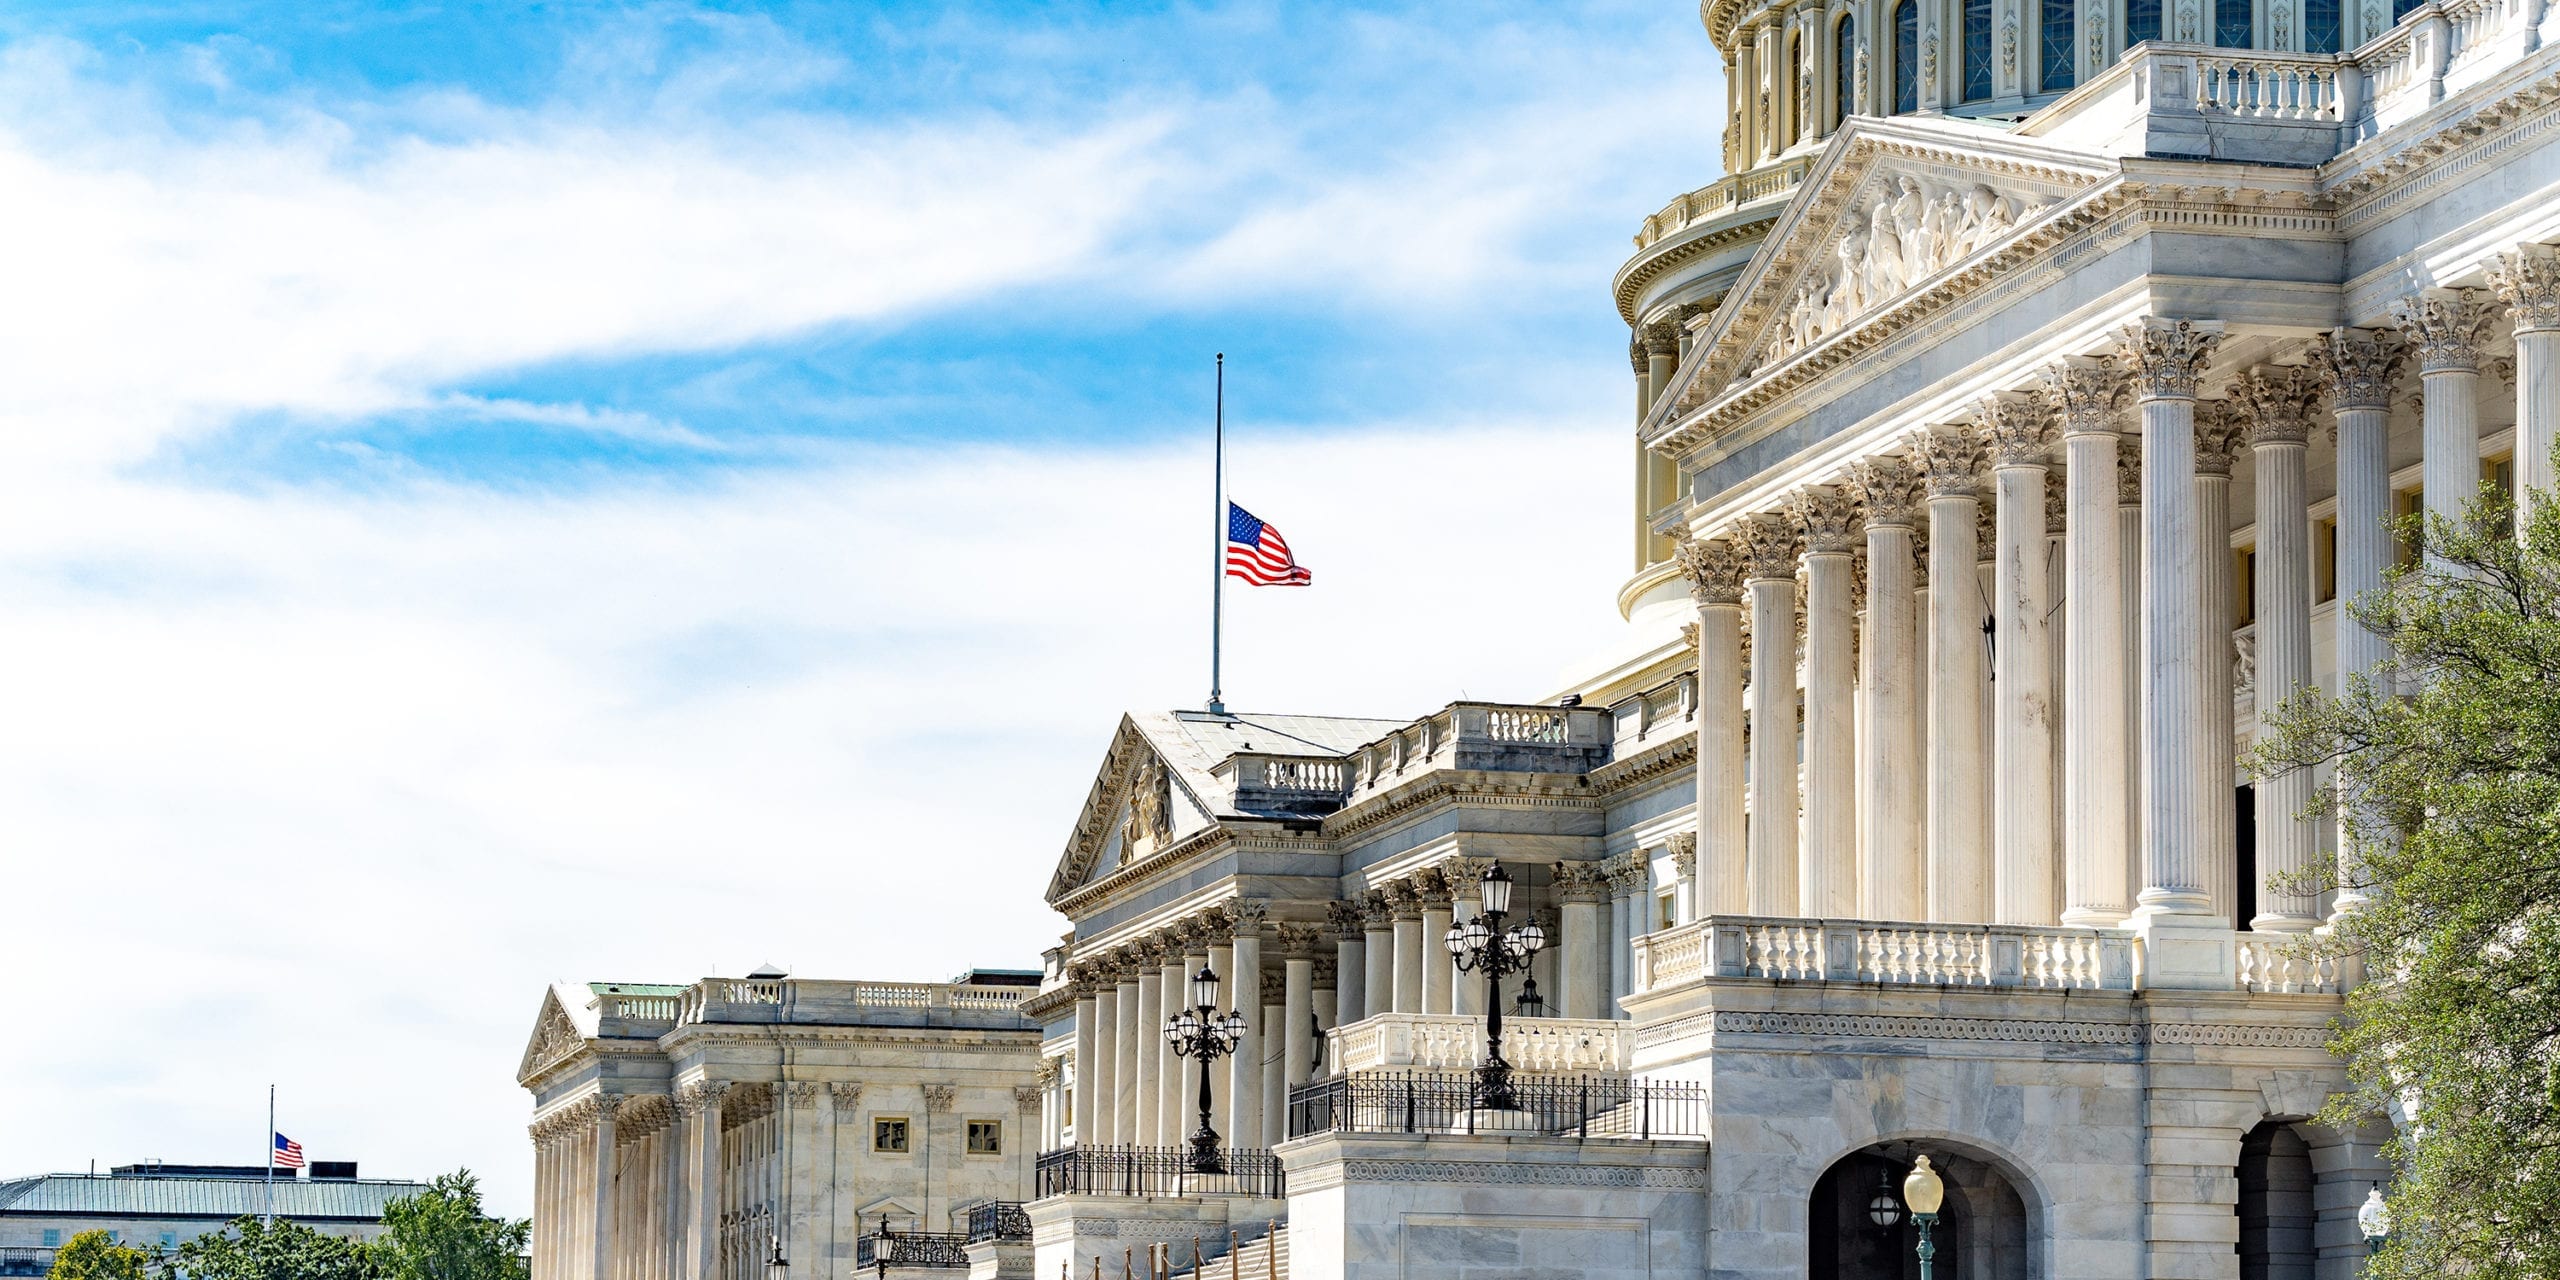 The US flag at half mast in fromt of the Capitol following the death of Justice Ruth Bader Ginsburg. Photo by Ted Eytan.